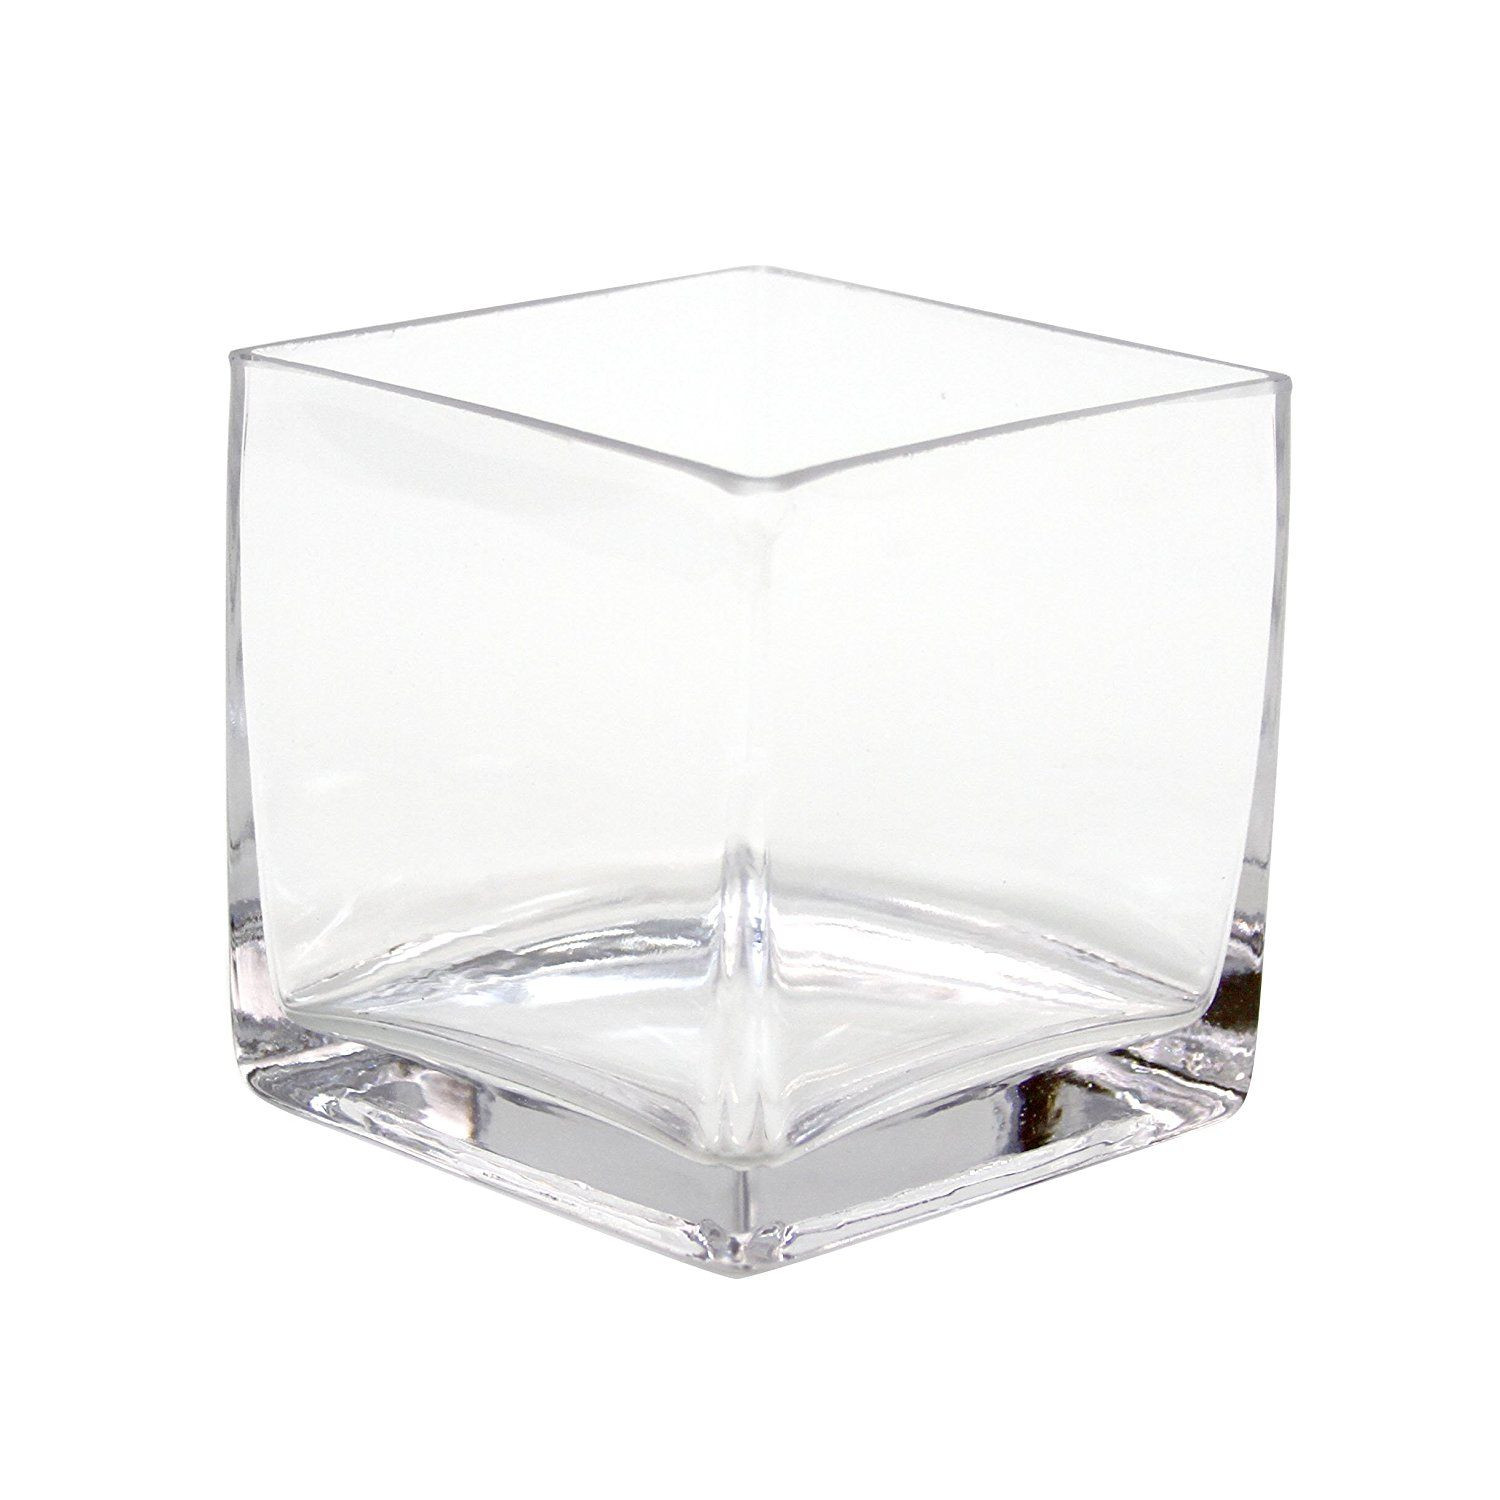 24 Unique Square Bud Vase 2024 free download square bud vase of koyal wholesale 404343 12 pack cube square glass vases 4 by 4 by 4 throughout glass